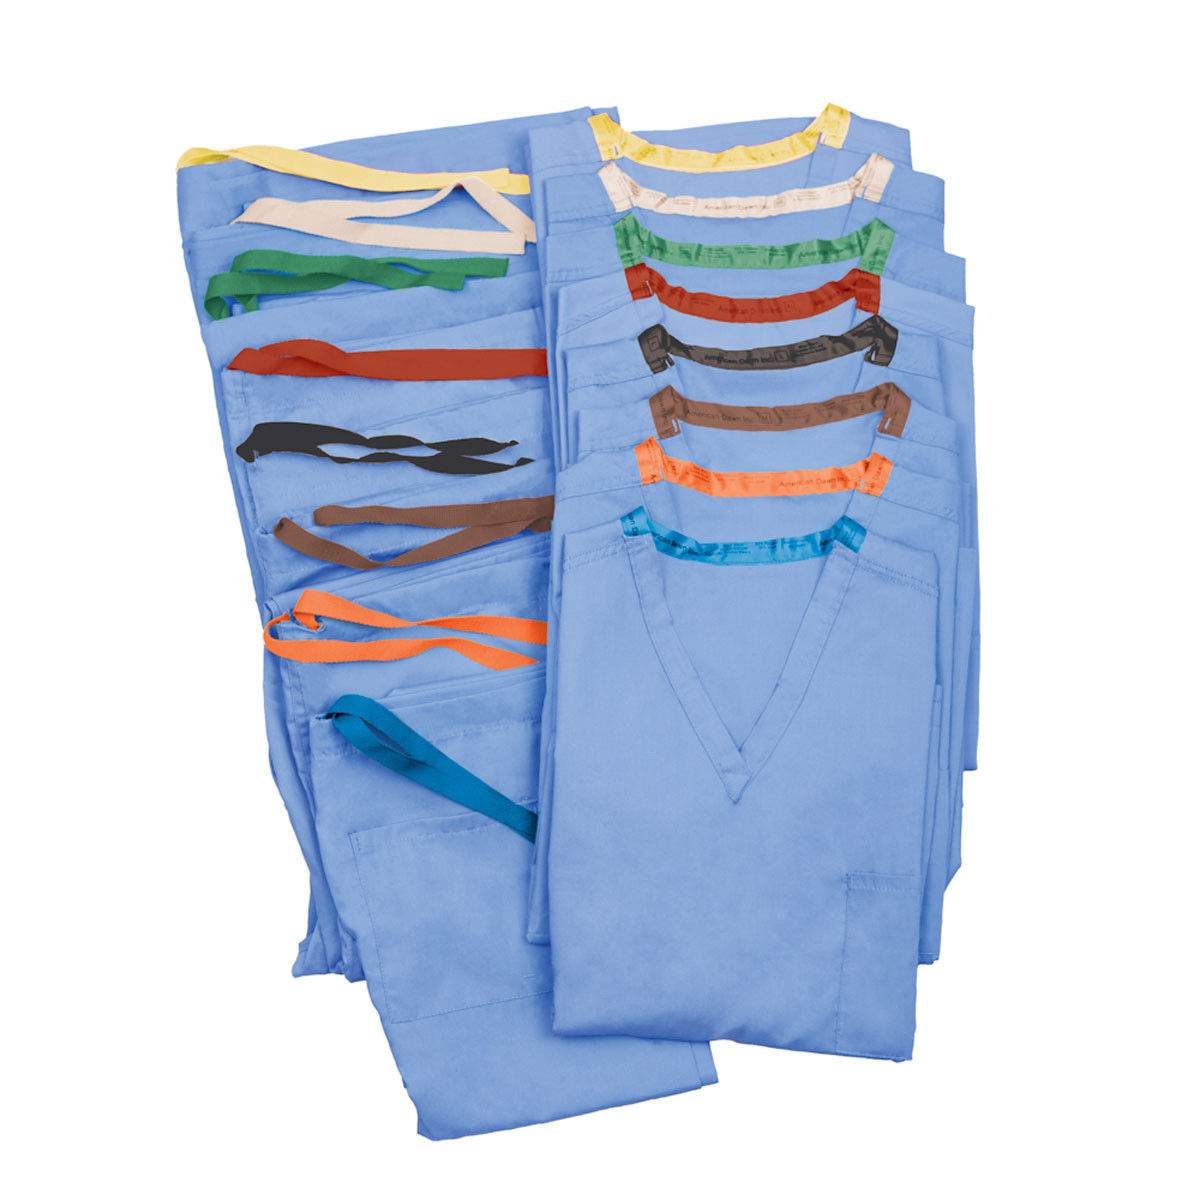 What are the T180 Reversible Ceil Blue Scrub Tops and Pants designed for?